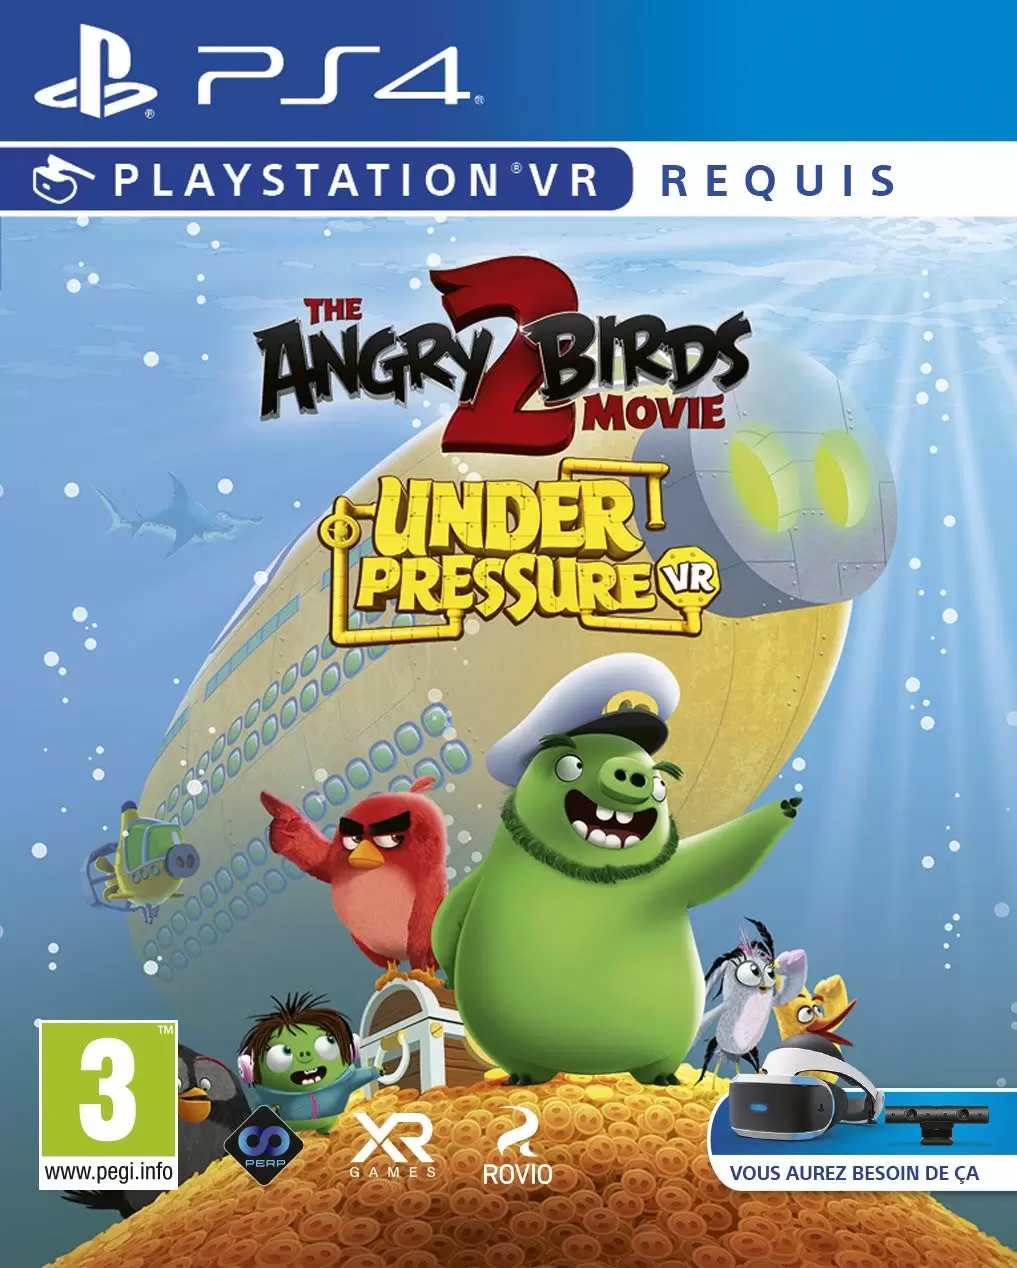 PS4 Games - The Angry Birds Movie 2 - Under Pressure VR